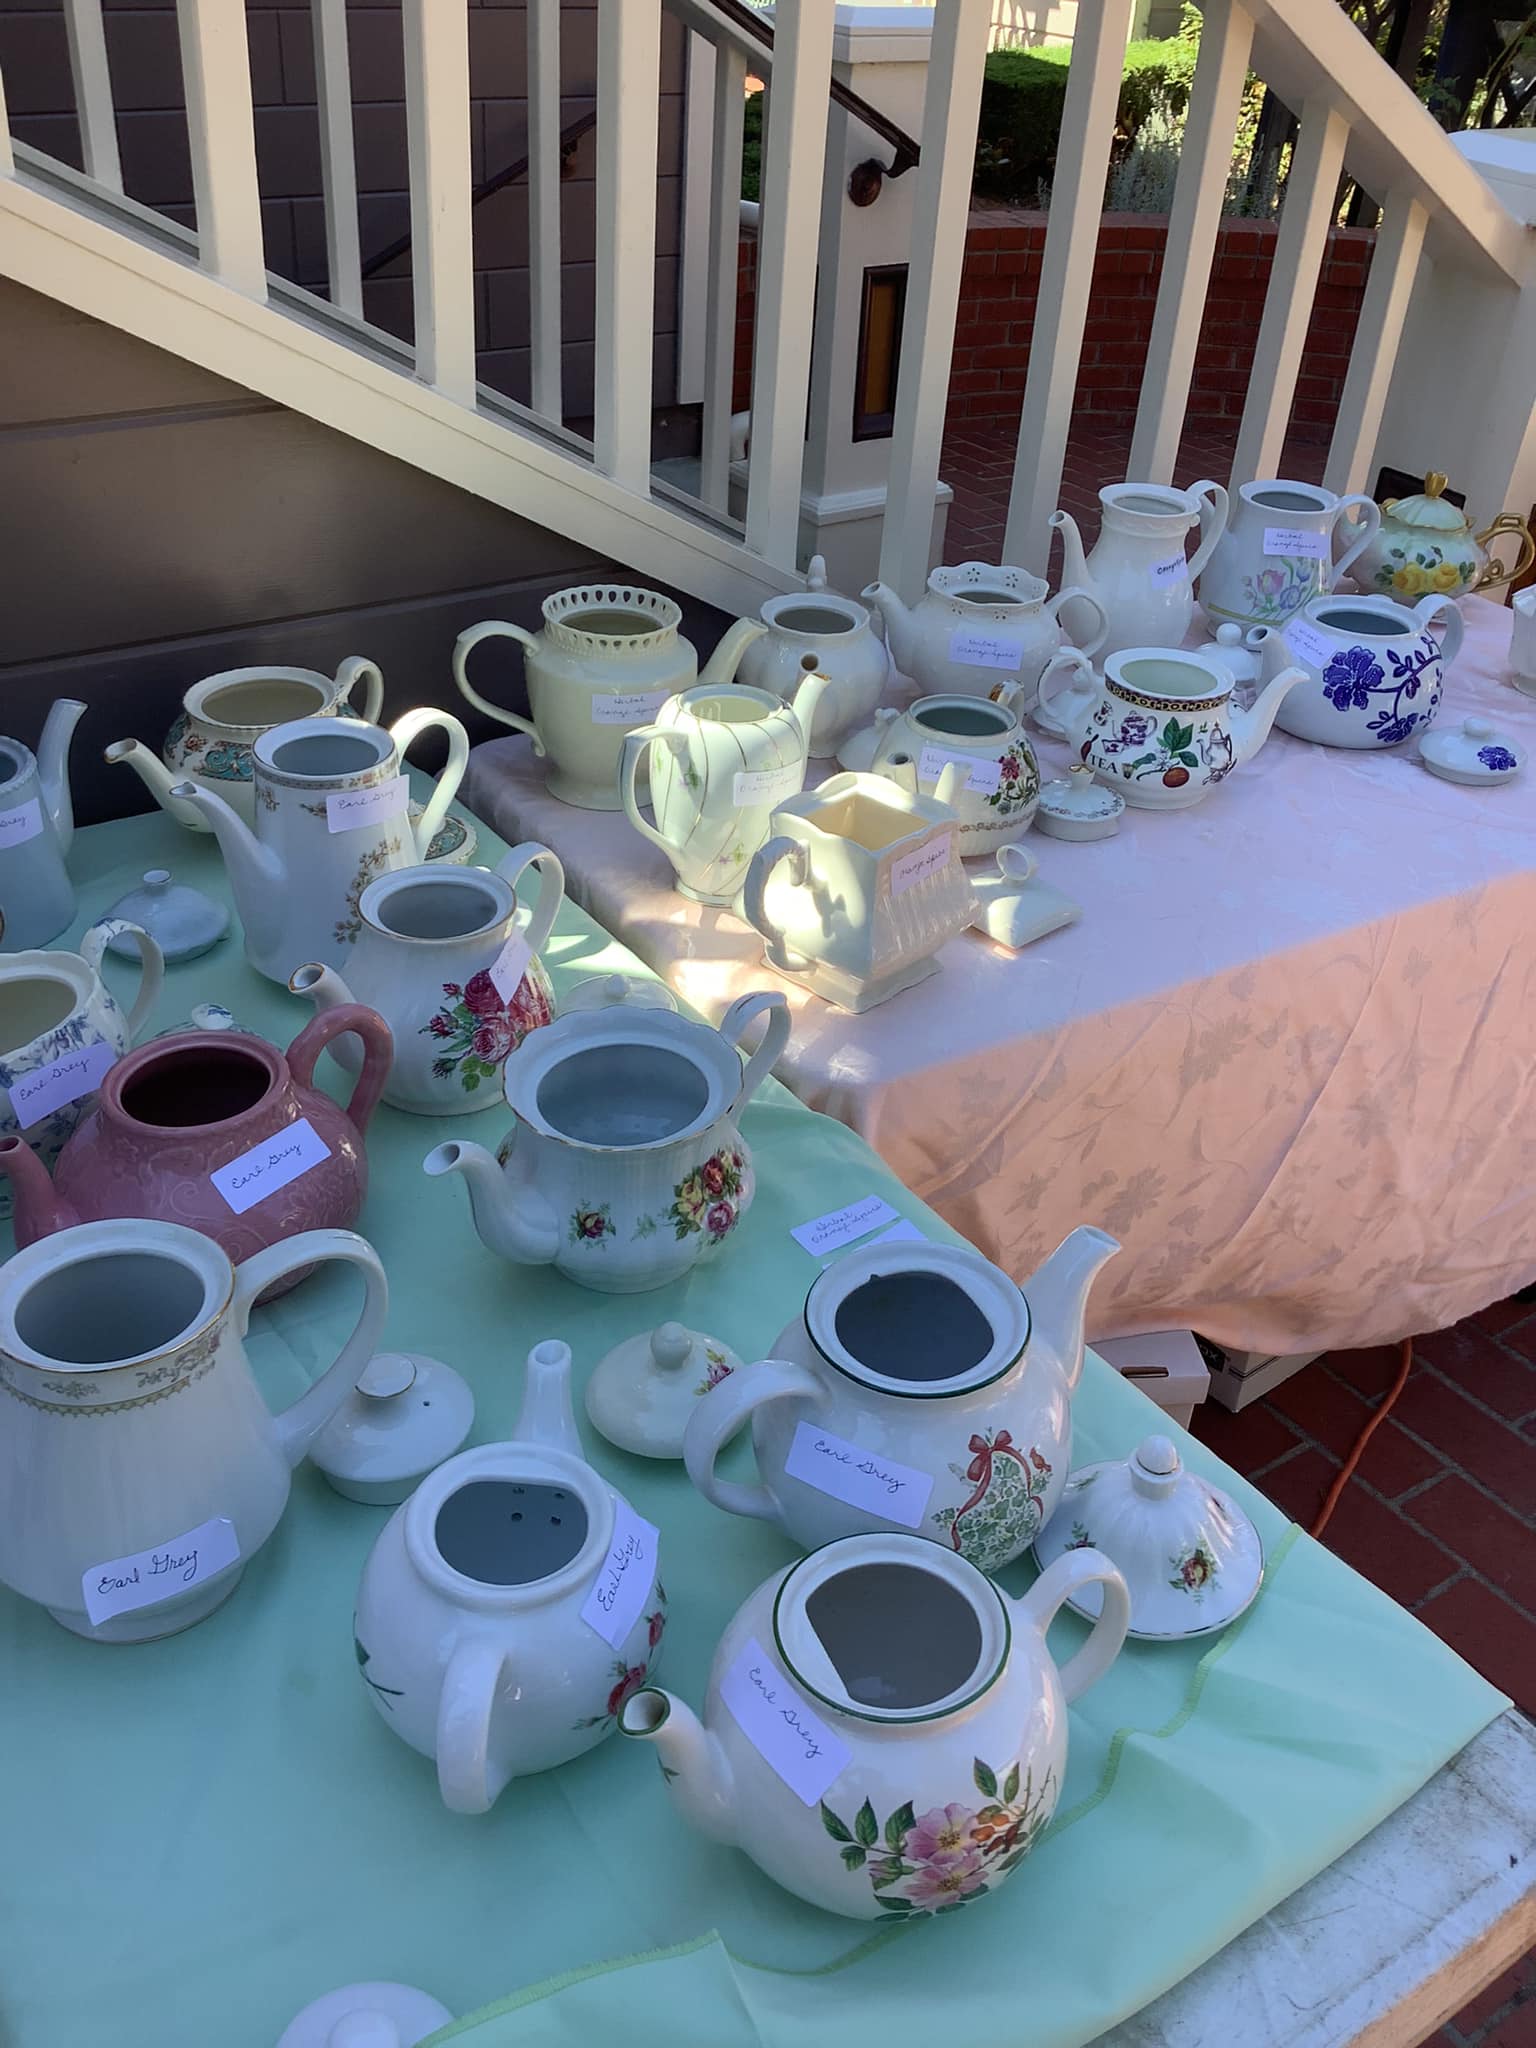 Various teapots displayed on a table for sale at an outdoor market in Heritage Square, Oxnard, with price tags visible.